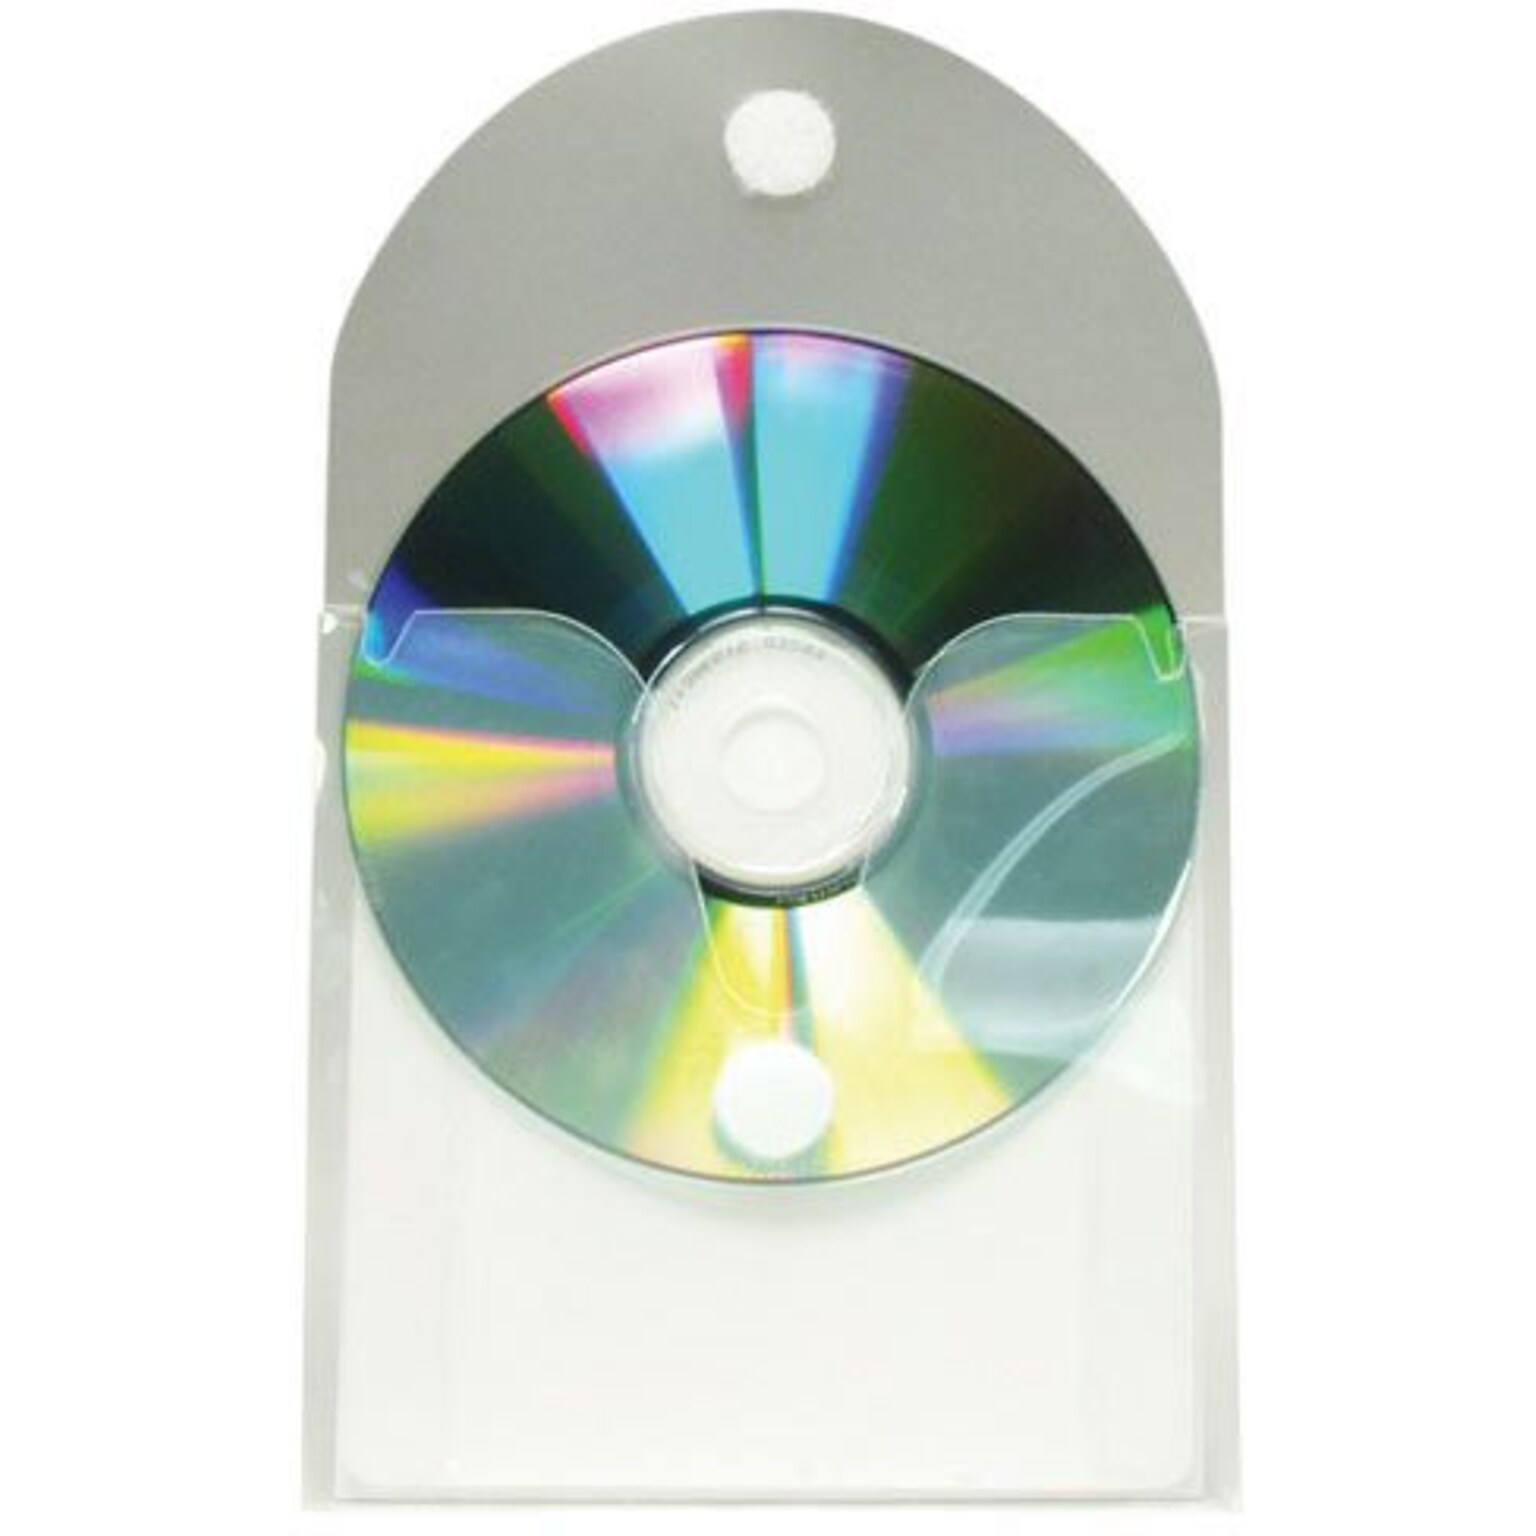 Baumgartens CD/DVD Pocket with Self-Adhesive Flap, Clear, 5 x 5, 12/CT